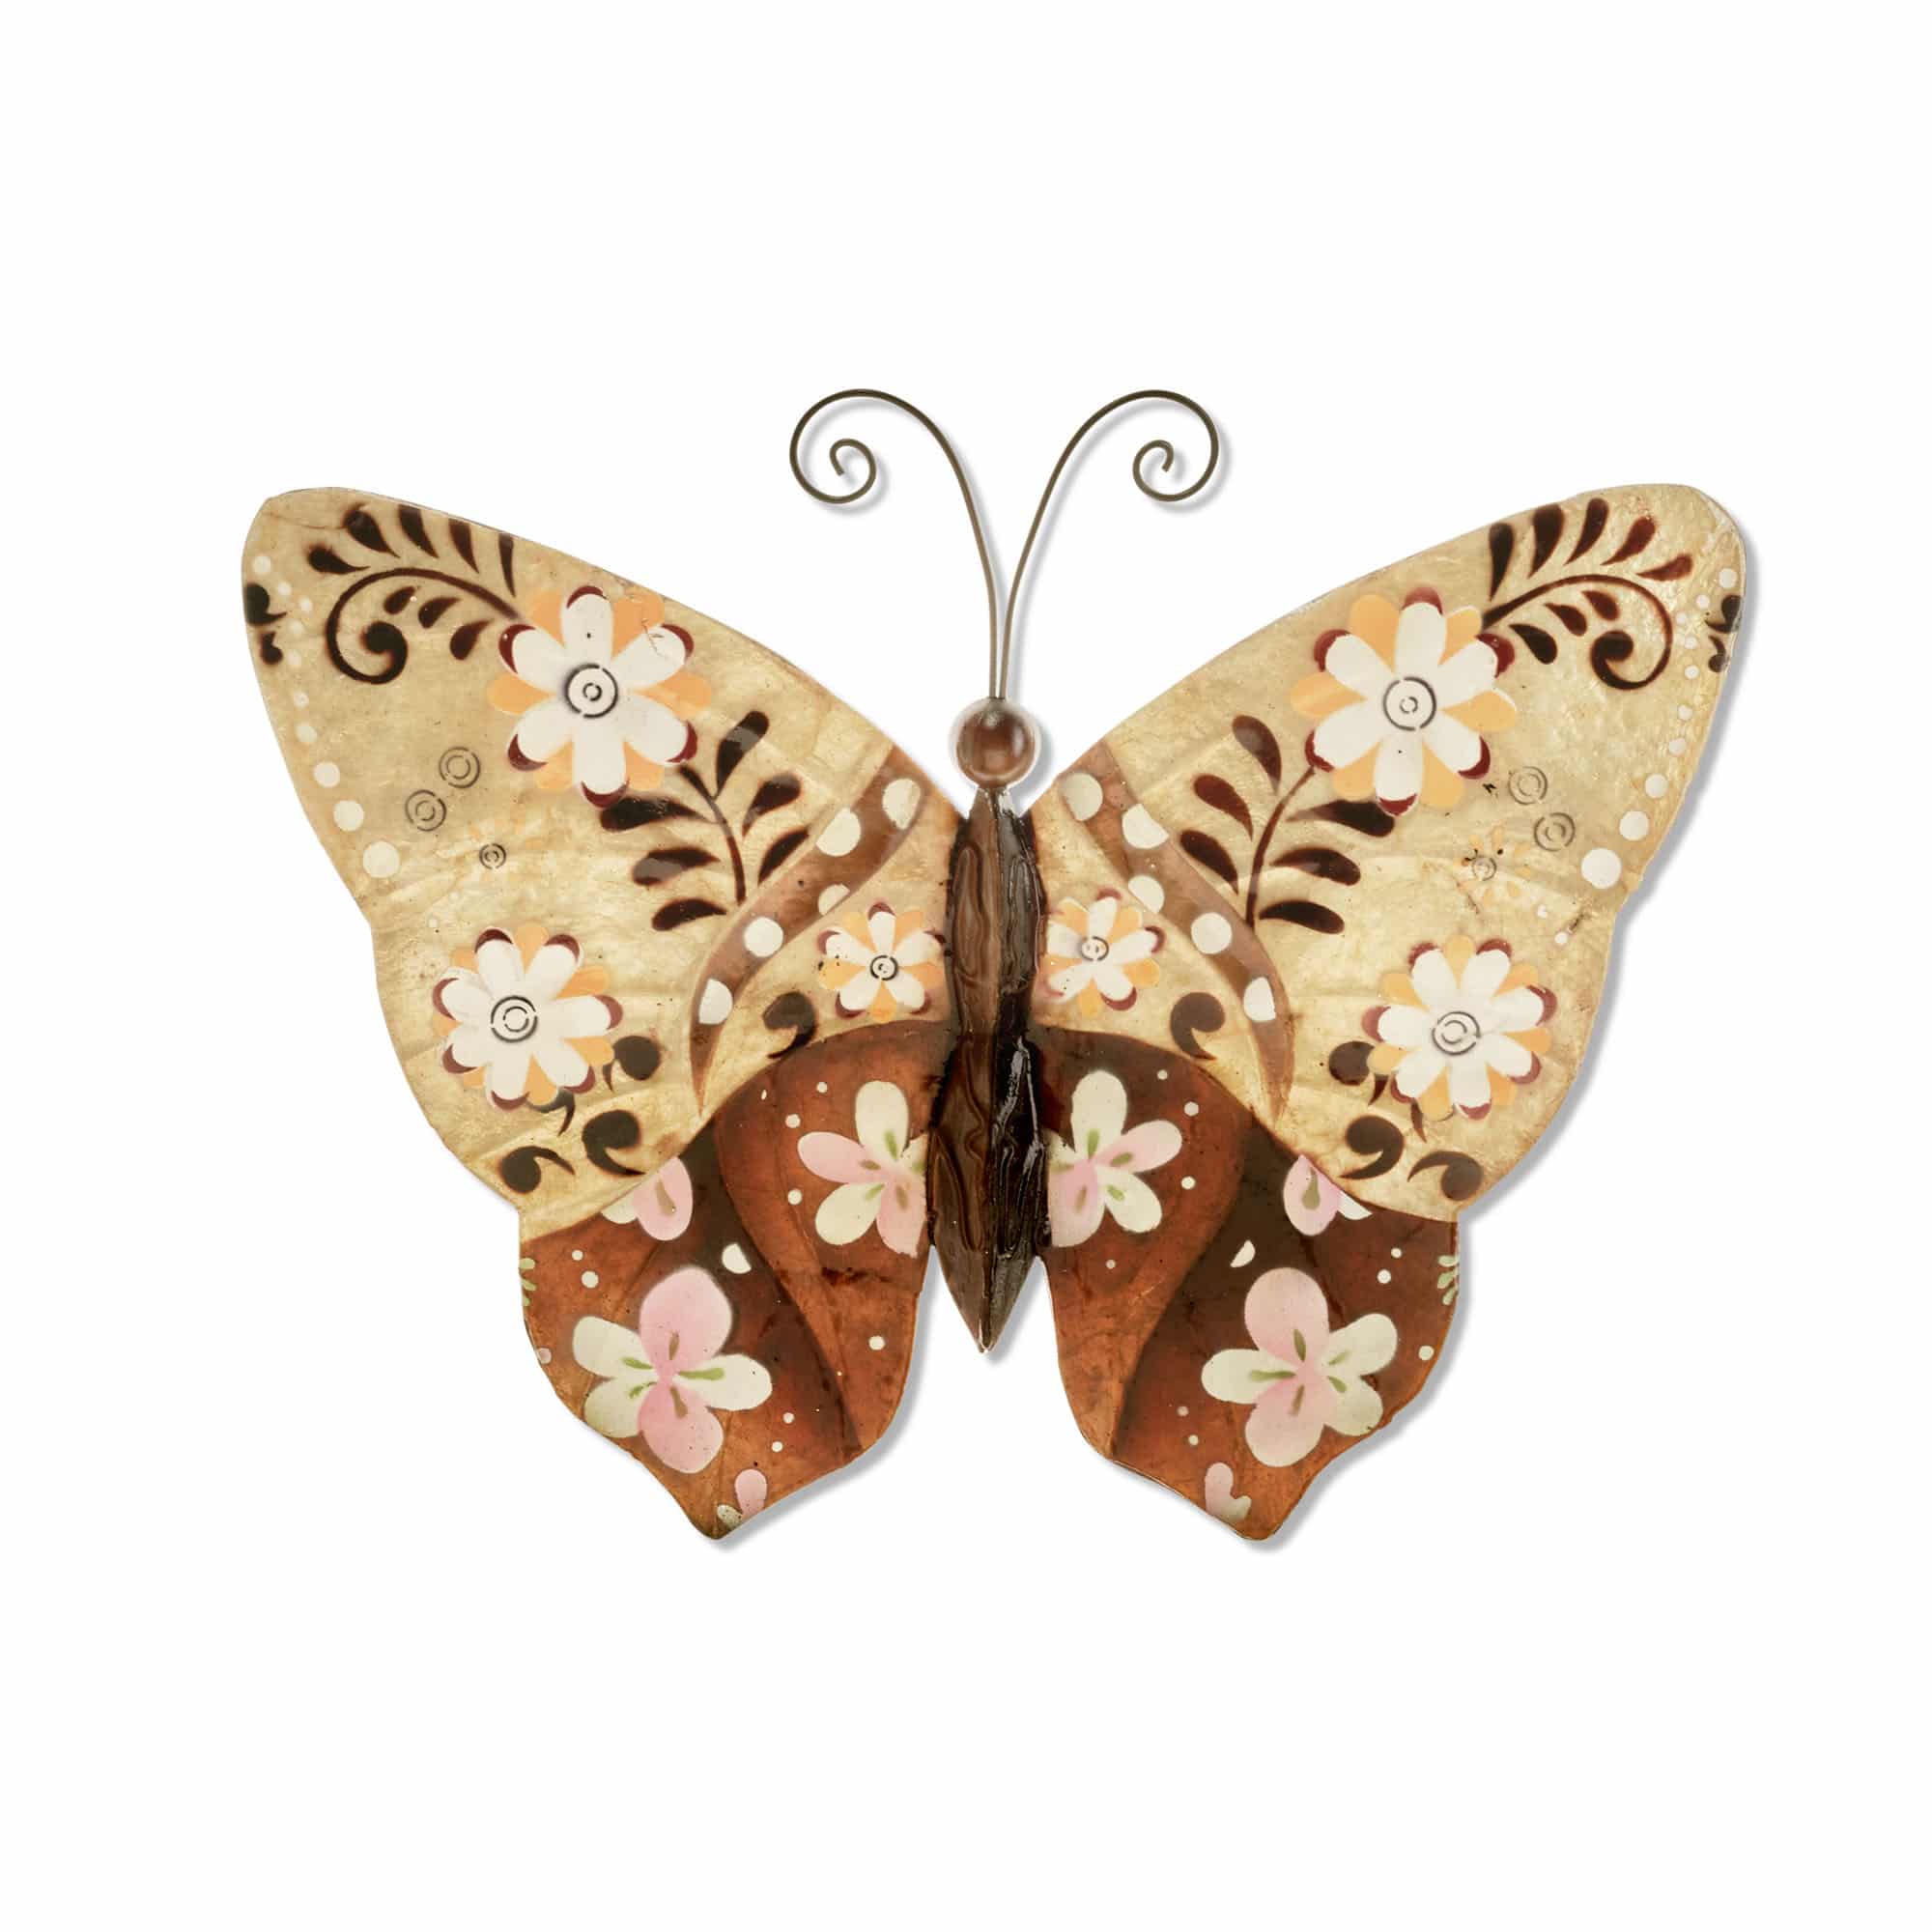 m2032 Eangee Home Design Butterfly Wall Decor Honey 13 Inches Length x 1 Inch Width x 9 Inches Height 